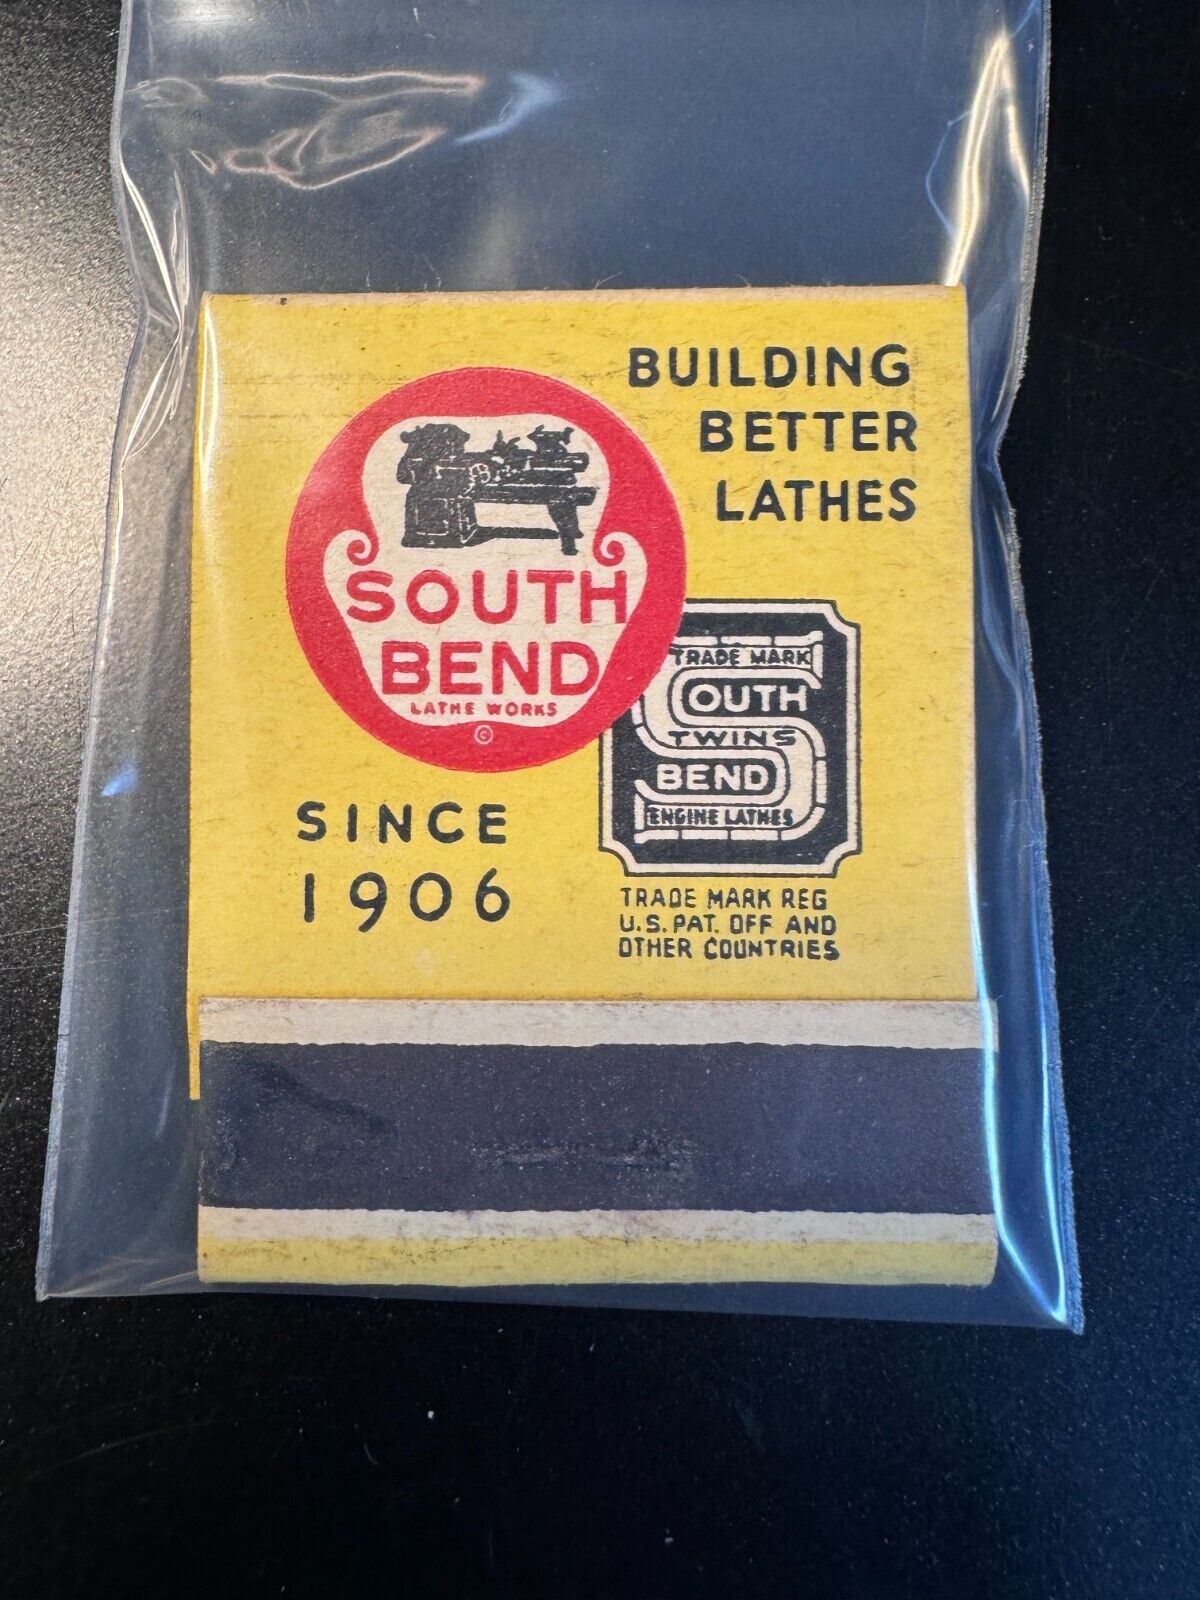 MATCHBOOK - SOUTH BEND LATHE WORKS - FOR THOSE WHO WANT THE BEST - UNSTRUCK